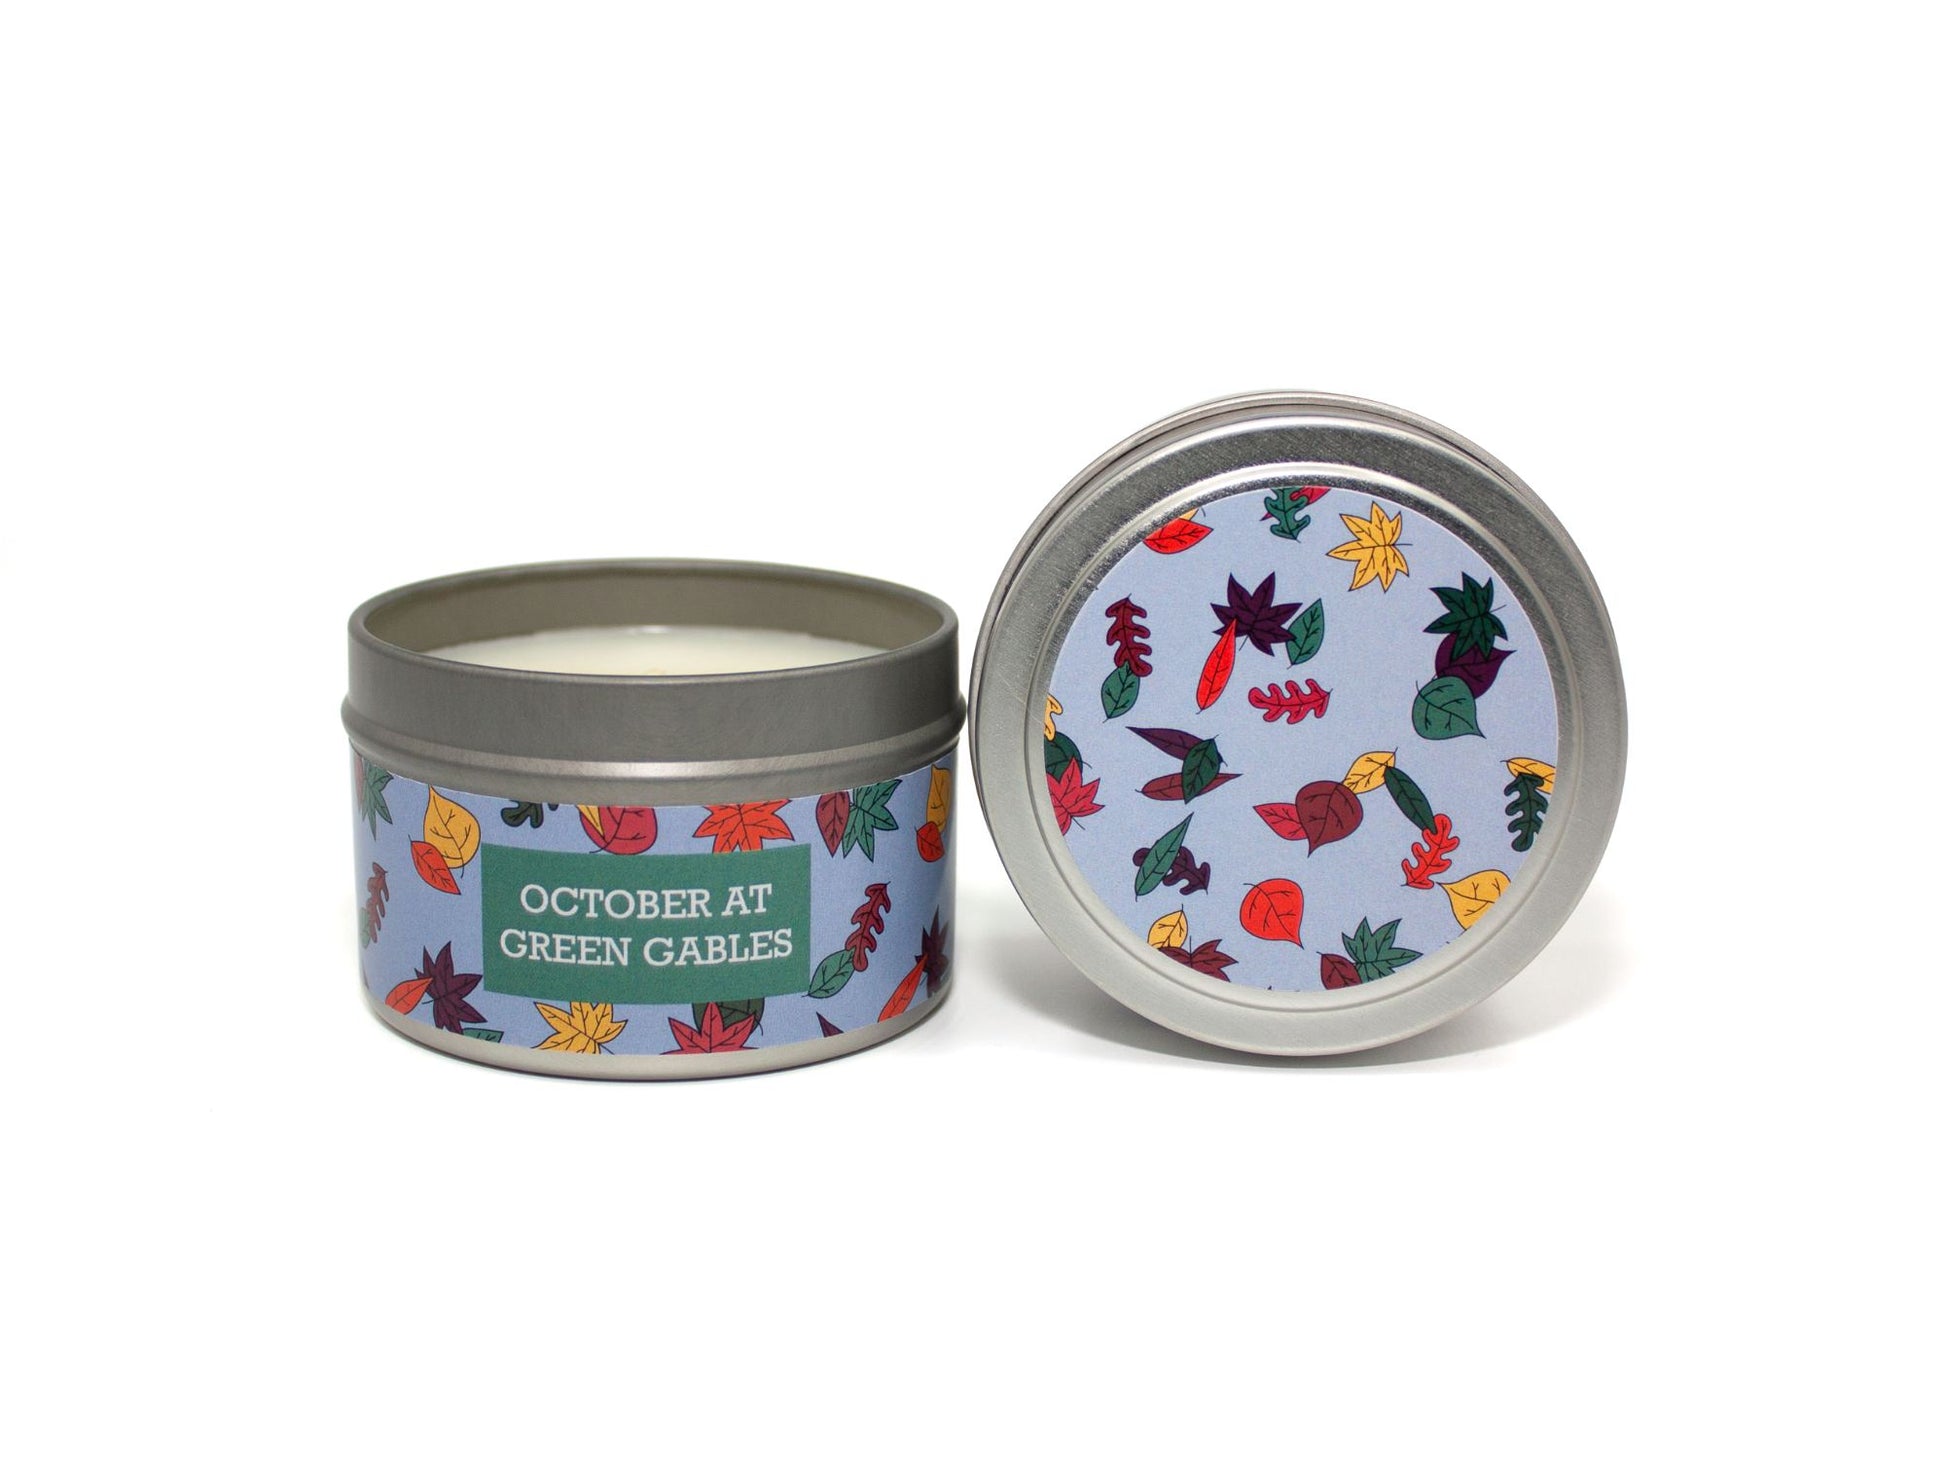 Onset & Rime pear scented candle called "October at Green Gables" in a 4 oz silver tin. The circular label on top is sky blue with a variety of autumn coloured leaves. The text on the front label is "October at Green Gables - Orchard Pear, Autumn Leaves, Birch Bark".